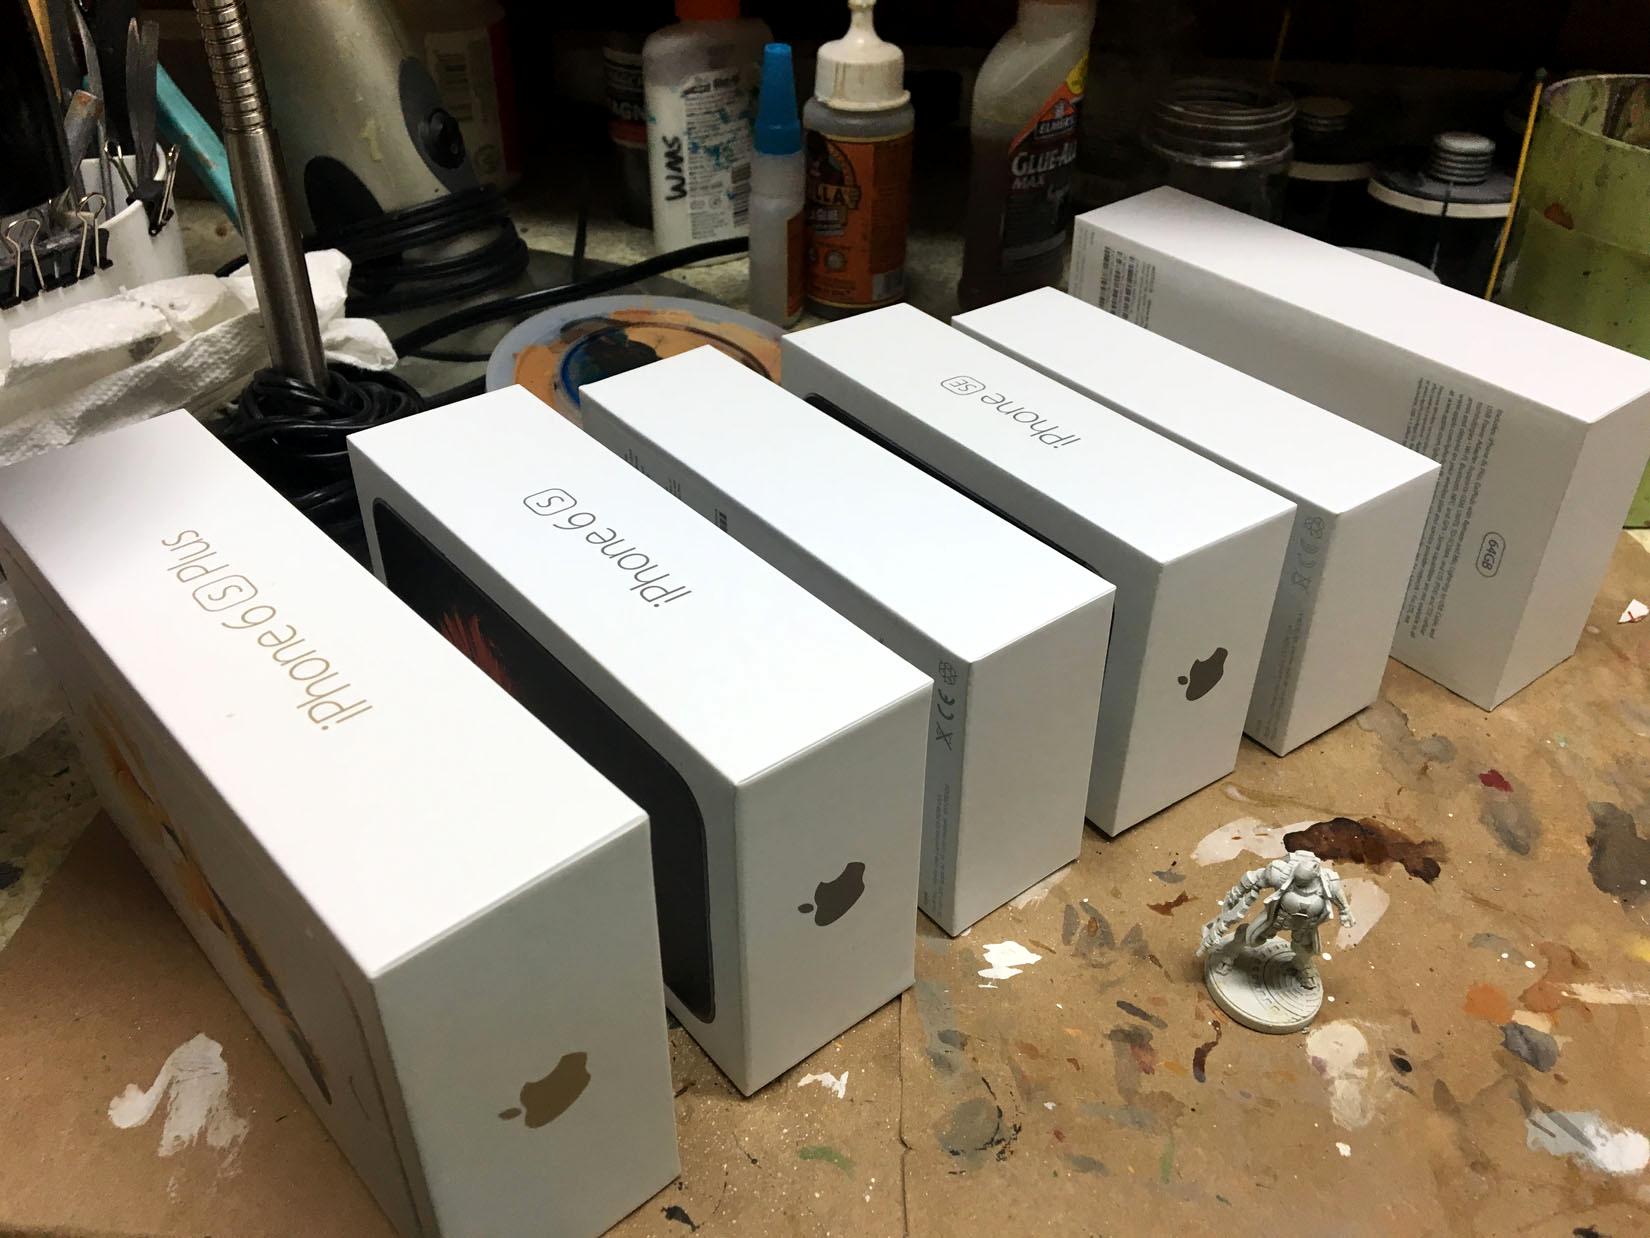 Infinity, iPhone boxes